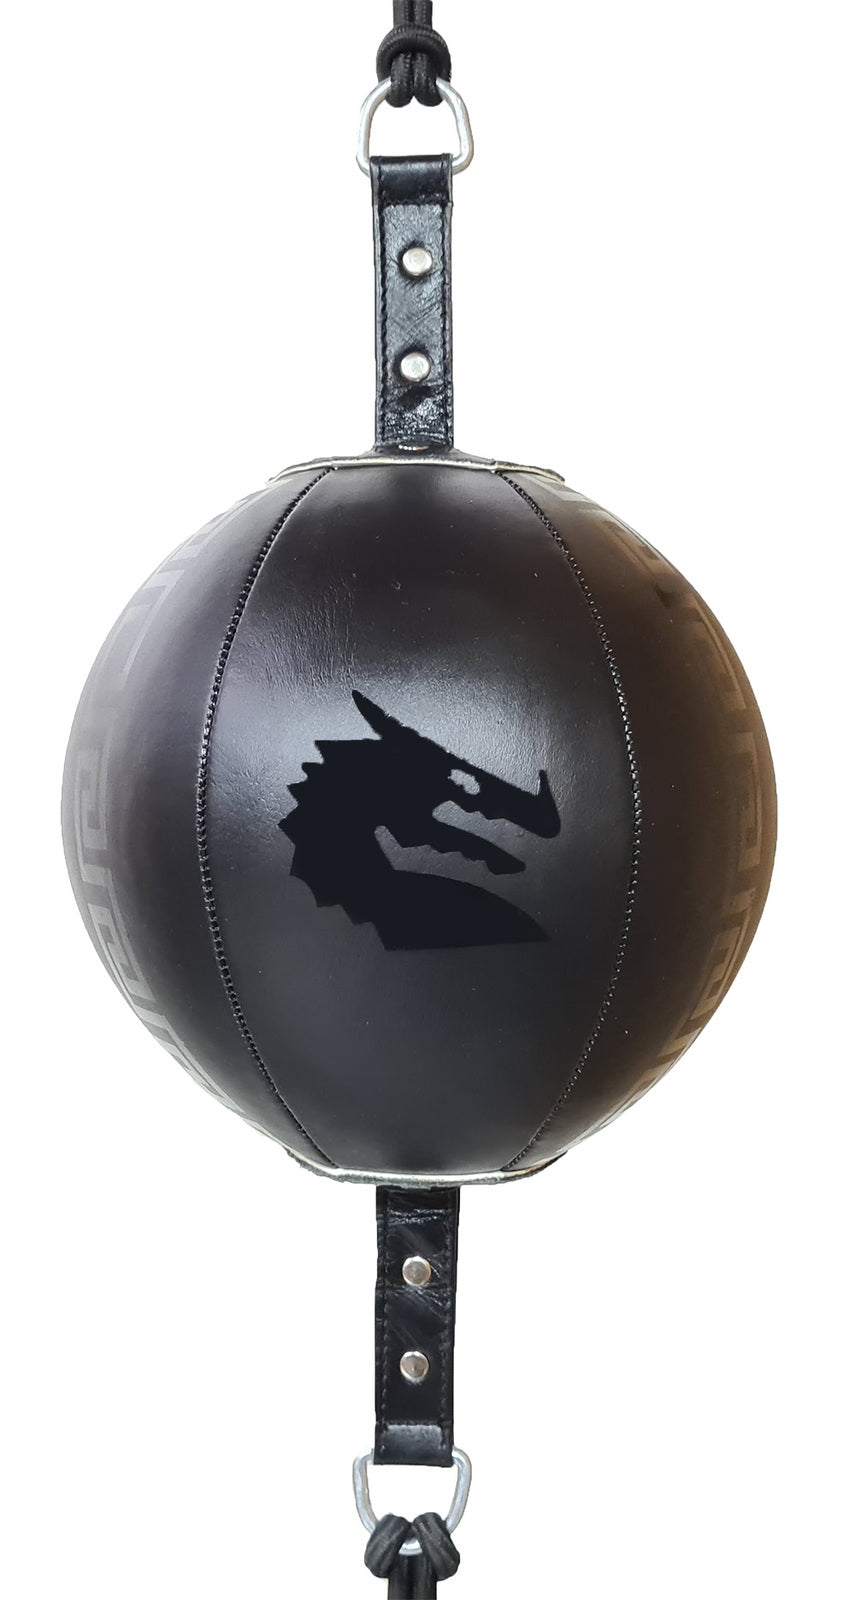 Morgan B2 Bomber Round Floor to Ceiling Ball + Adjustable Straps - LEATHER